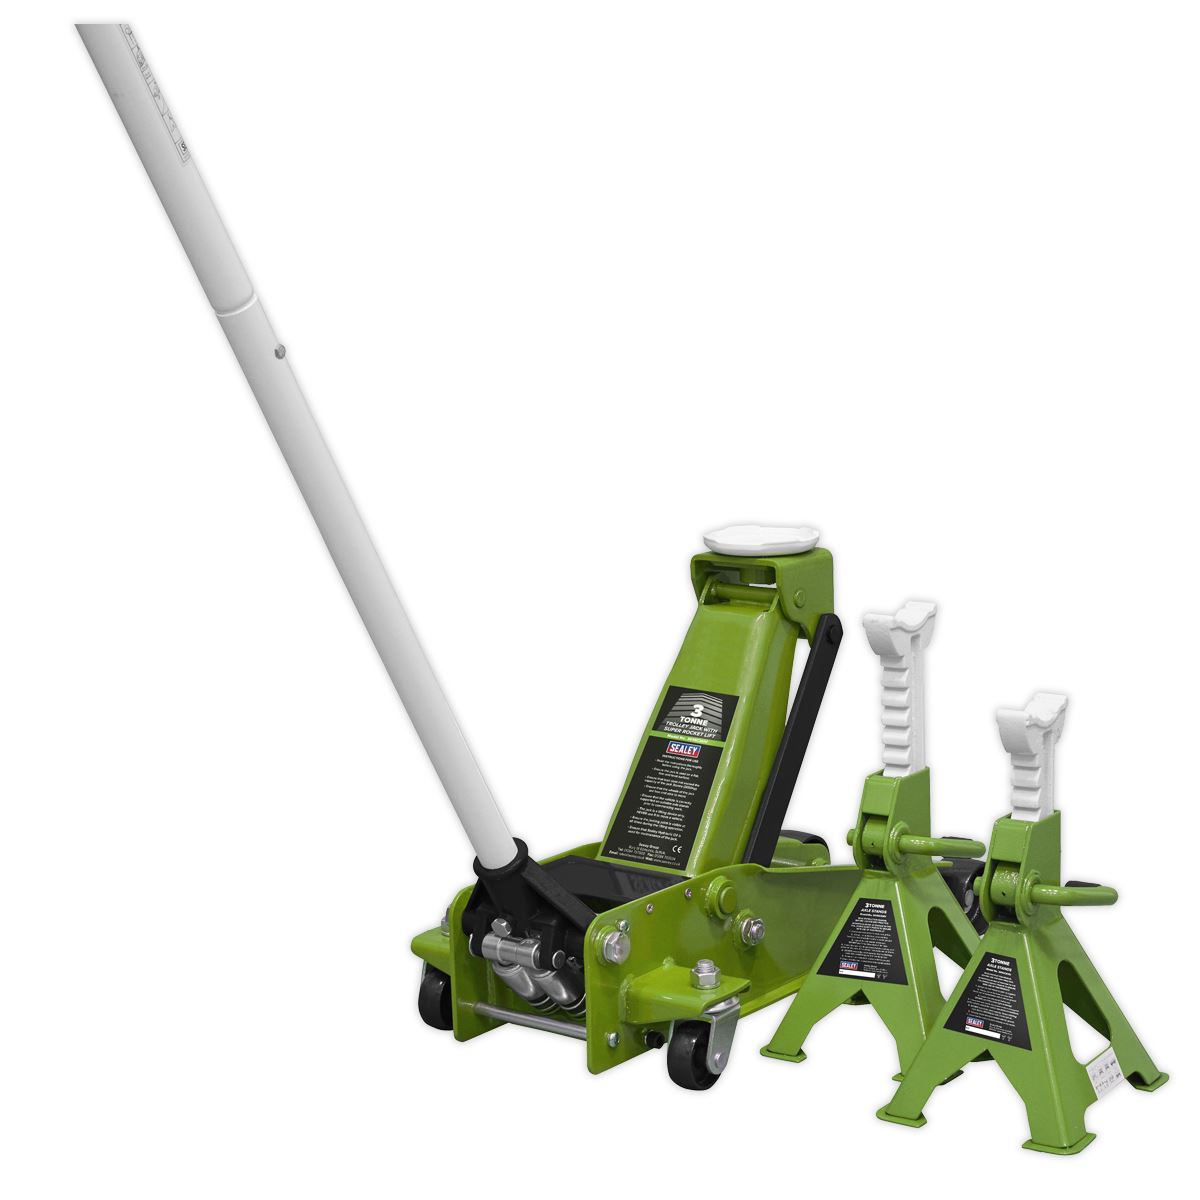 Sealey Trolley Jack 3 Tonne with Super Rocket Lift & Axle Stands (Pair) 3 Tonne Capacity per Stand-Hi-Vis